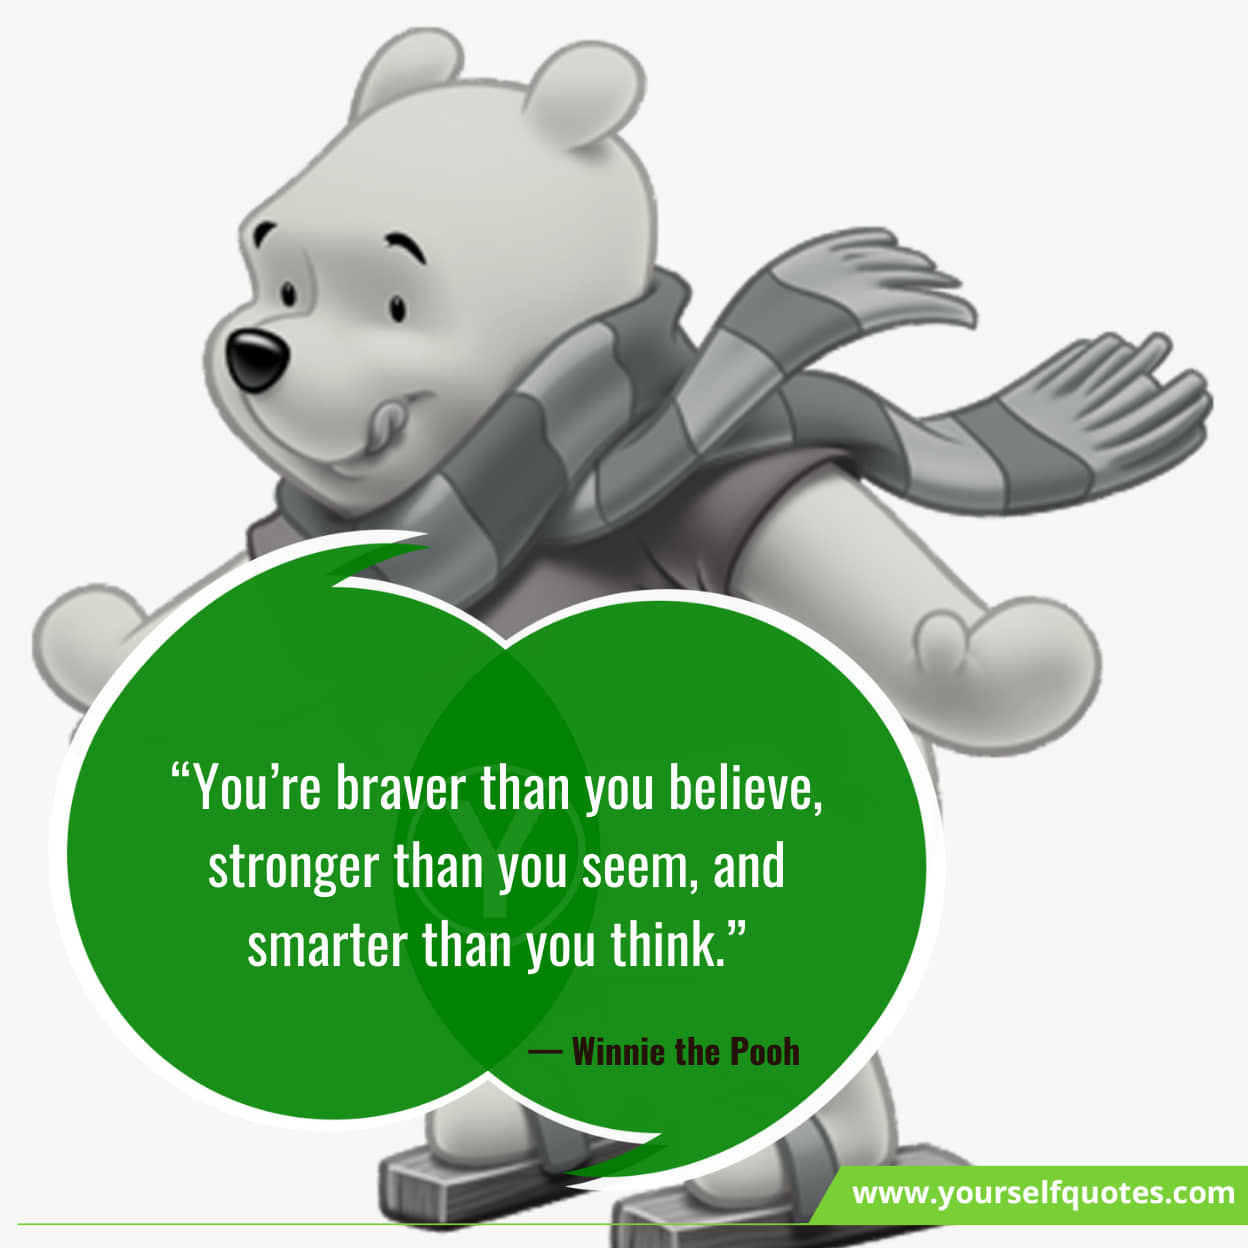 Winnie The Pooh Quotes On Life